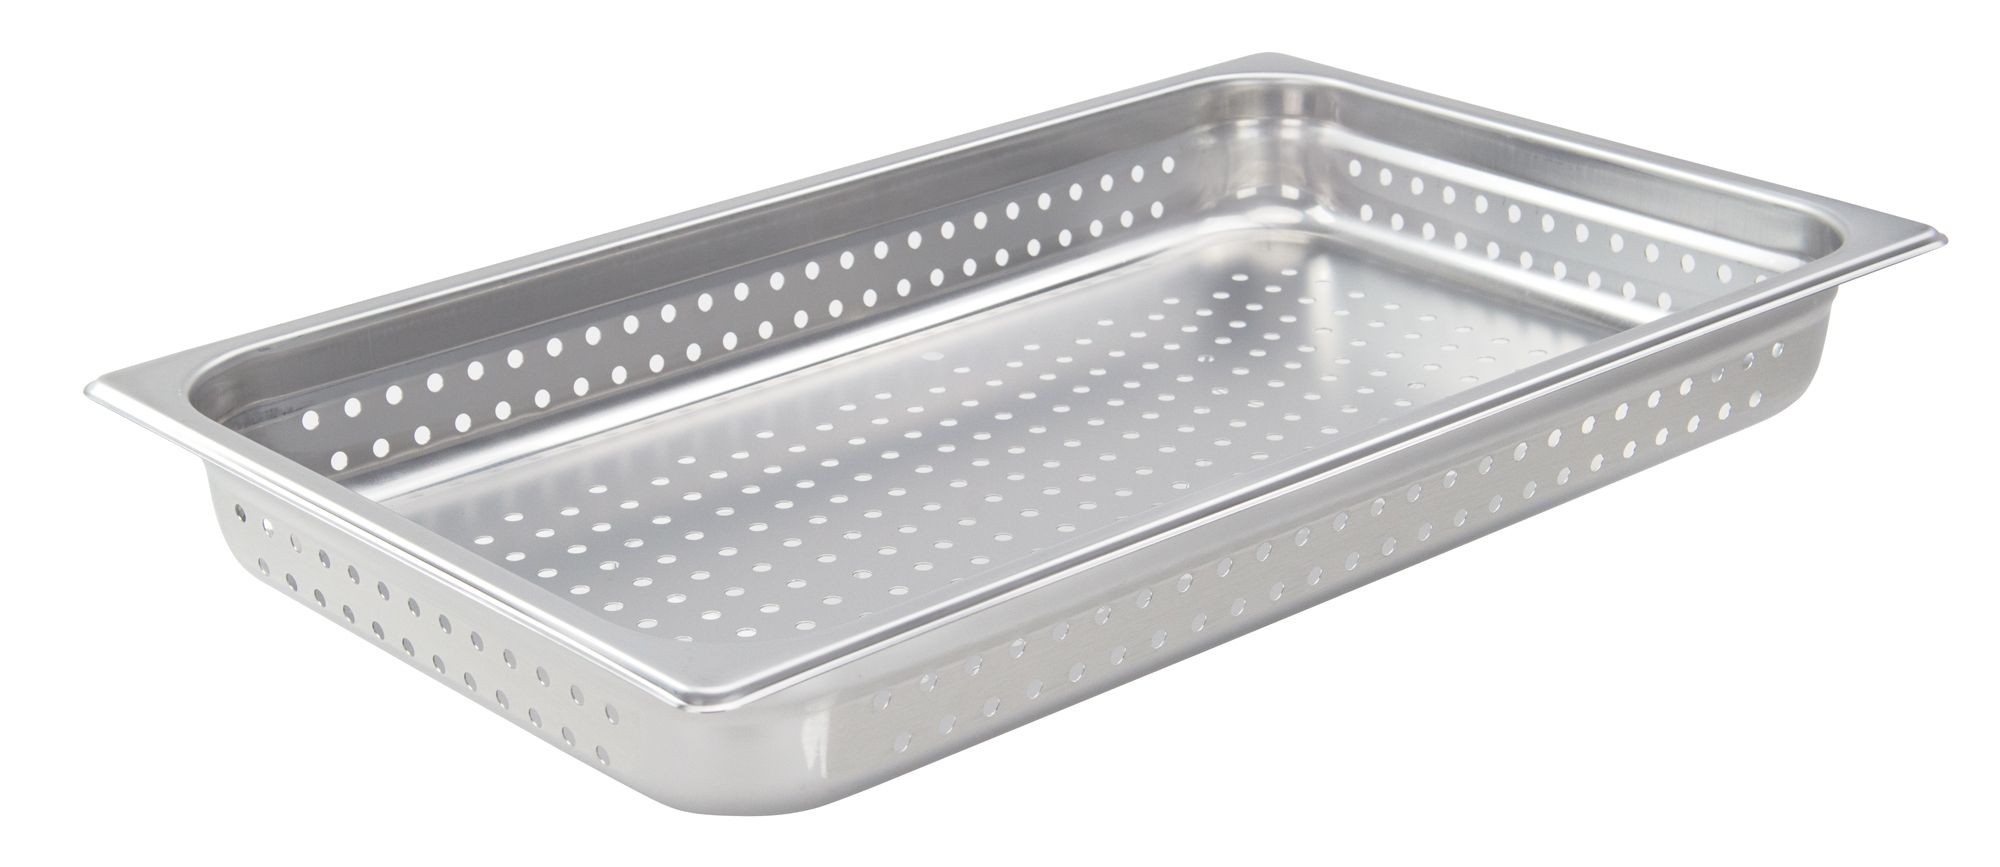 Winco SPJH-102PF Full Size Perforated Steam Pan, 2-1/2" Deep